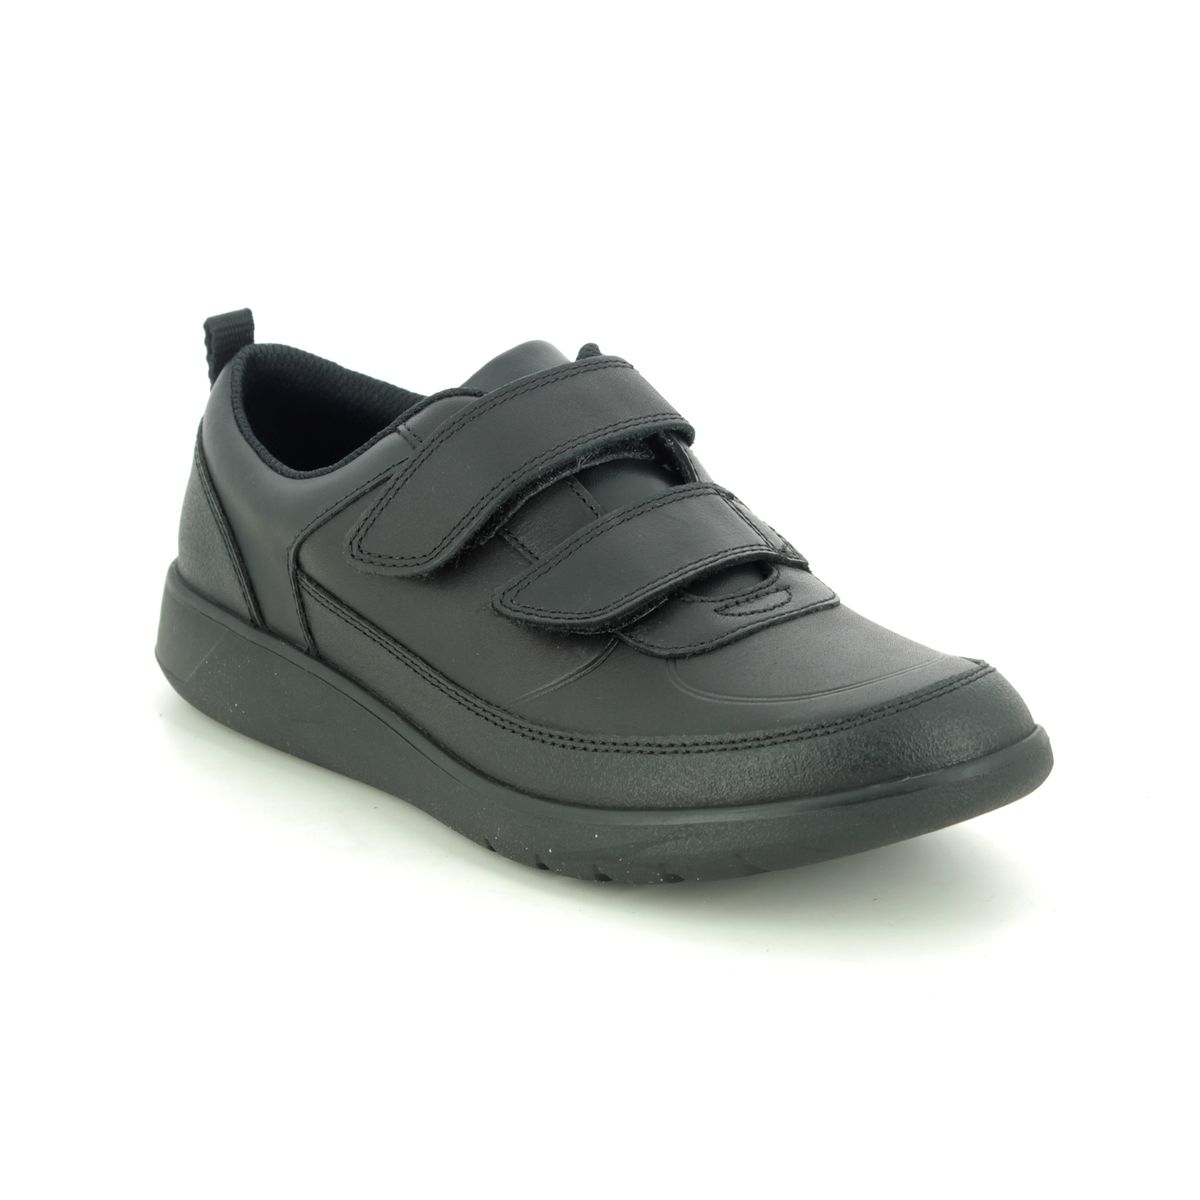 Clarks Scape Flare Y Black Leather Kids Boys Shoes 494096F In Size 4 In Plain Black Leather F Width Fitting Regular Fit For School For kids